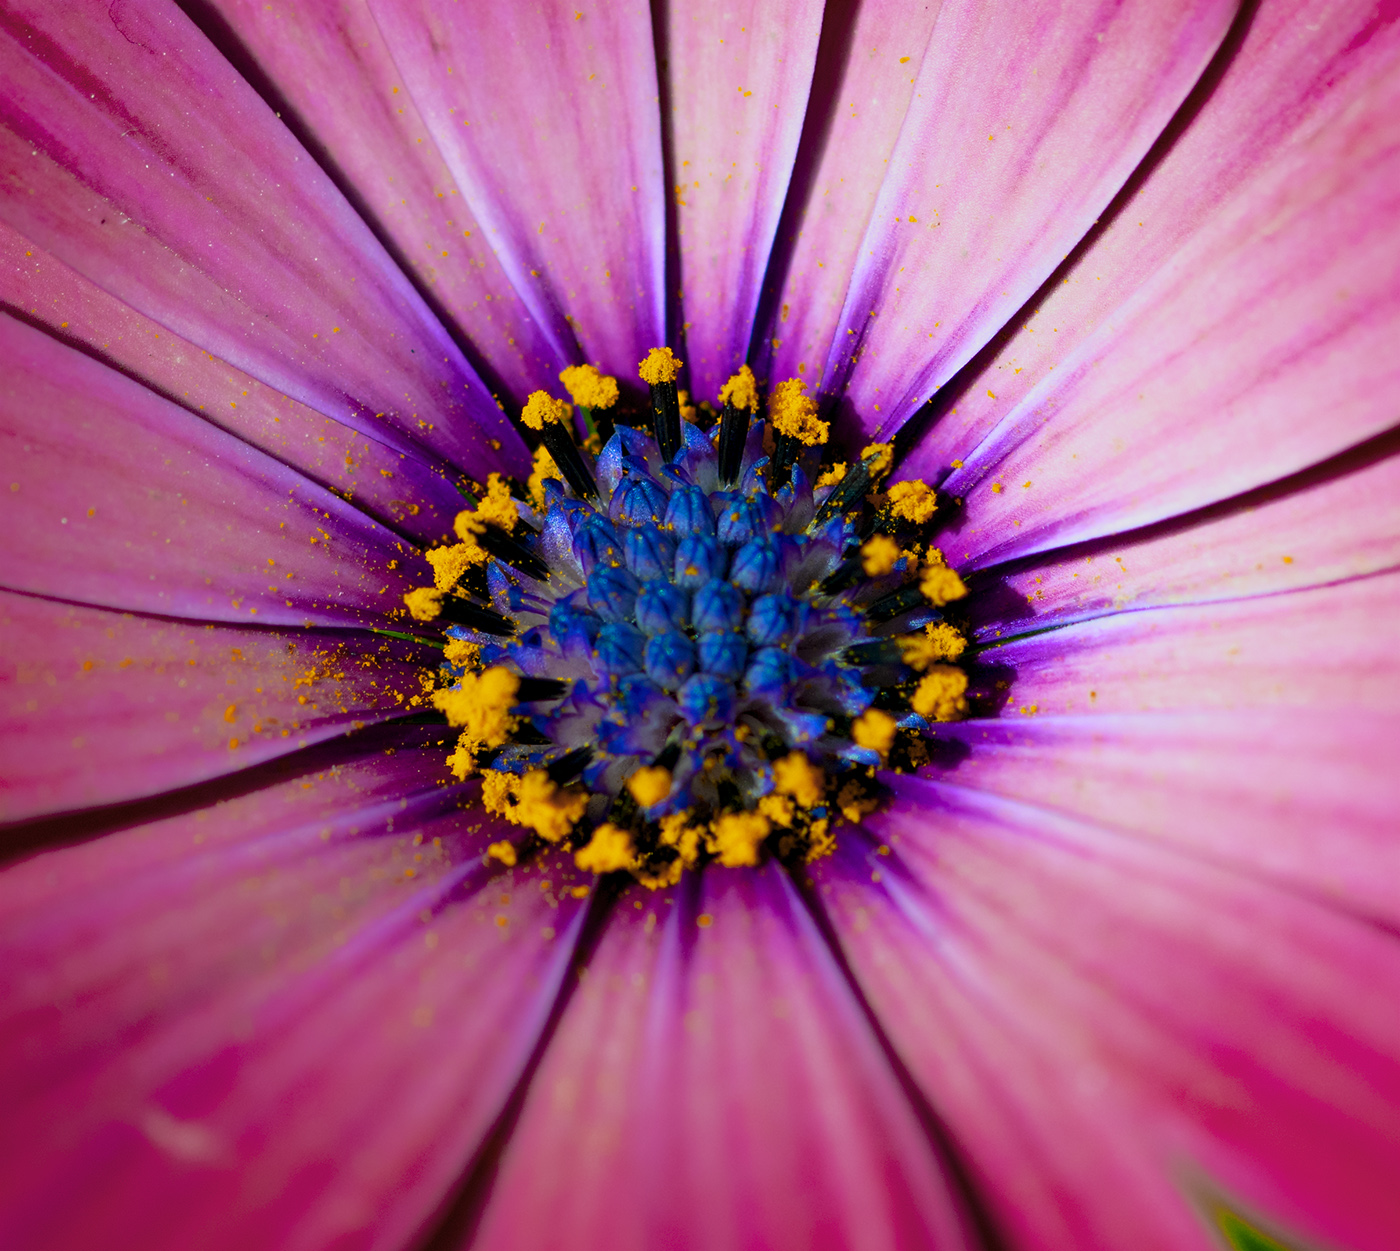 Pollen Grains on the Flower Core by Keith Au